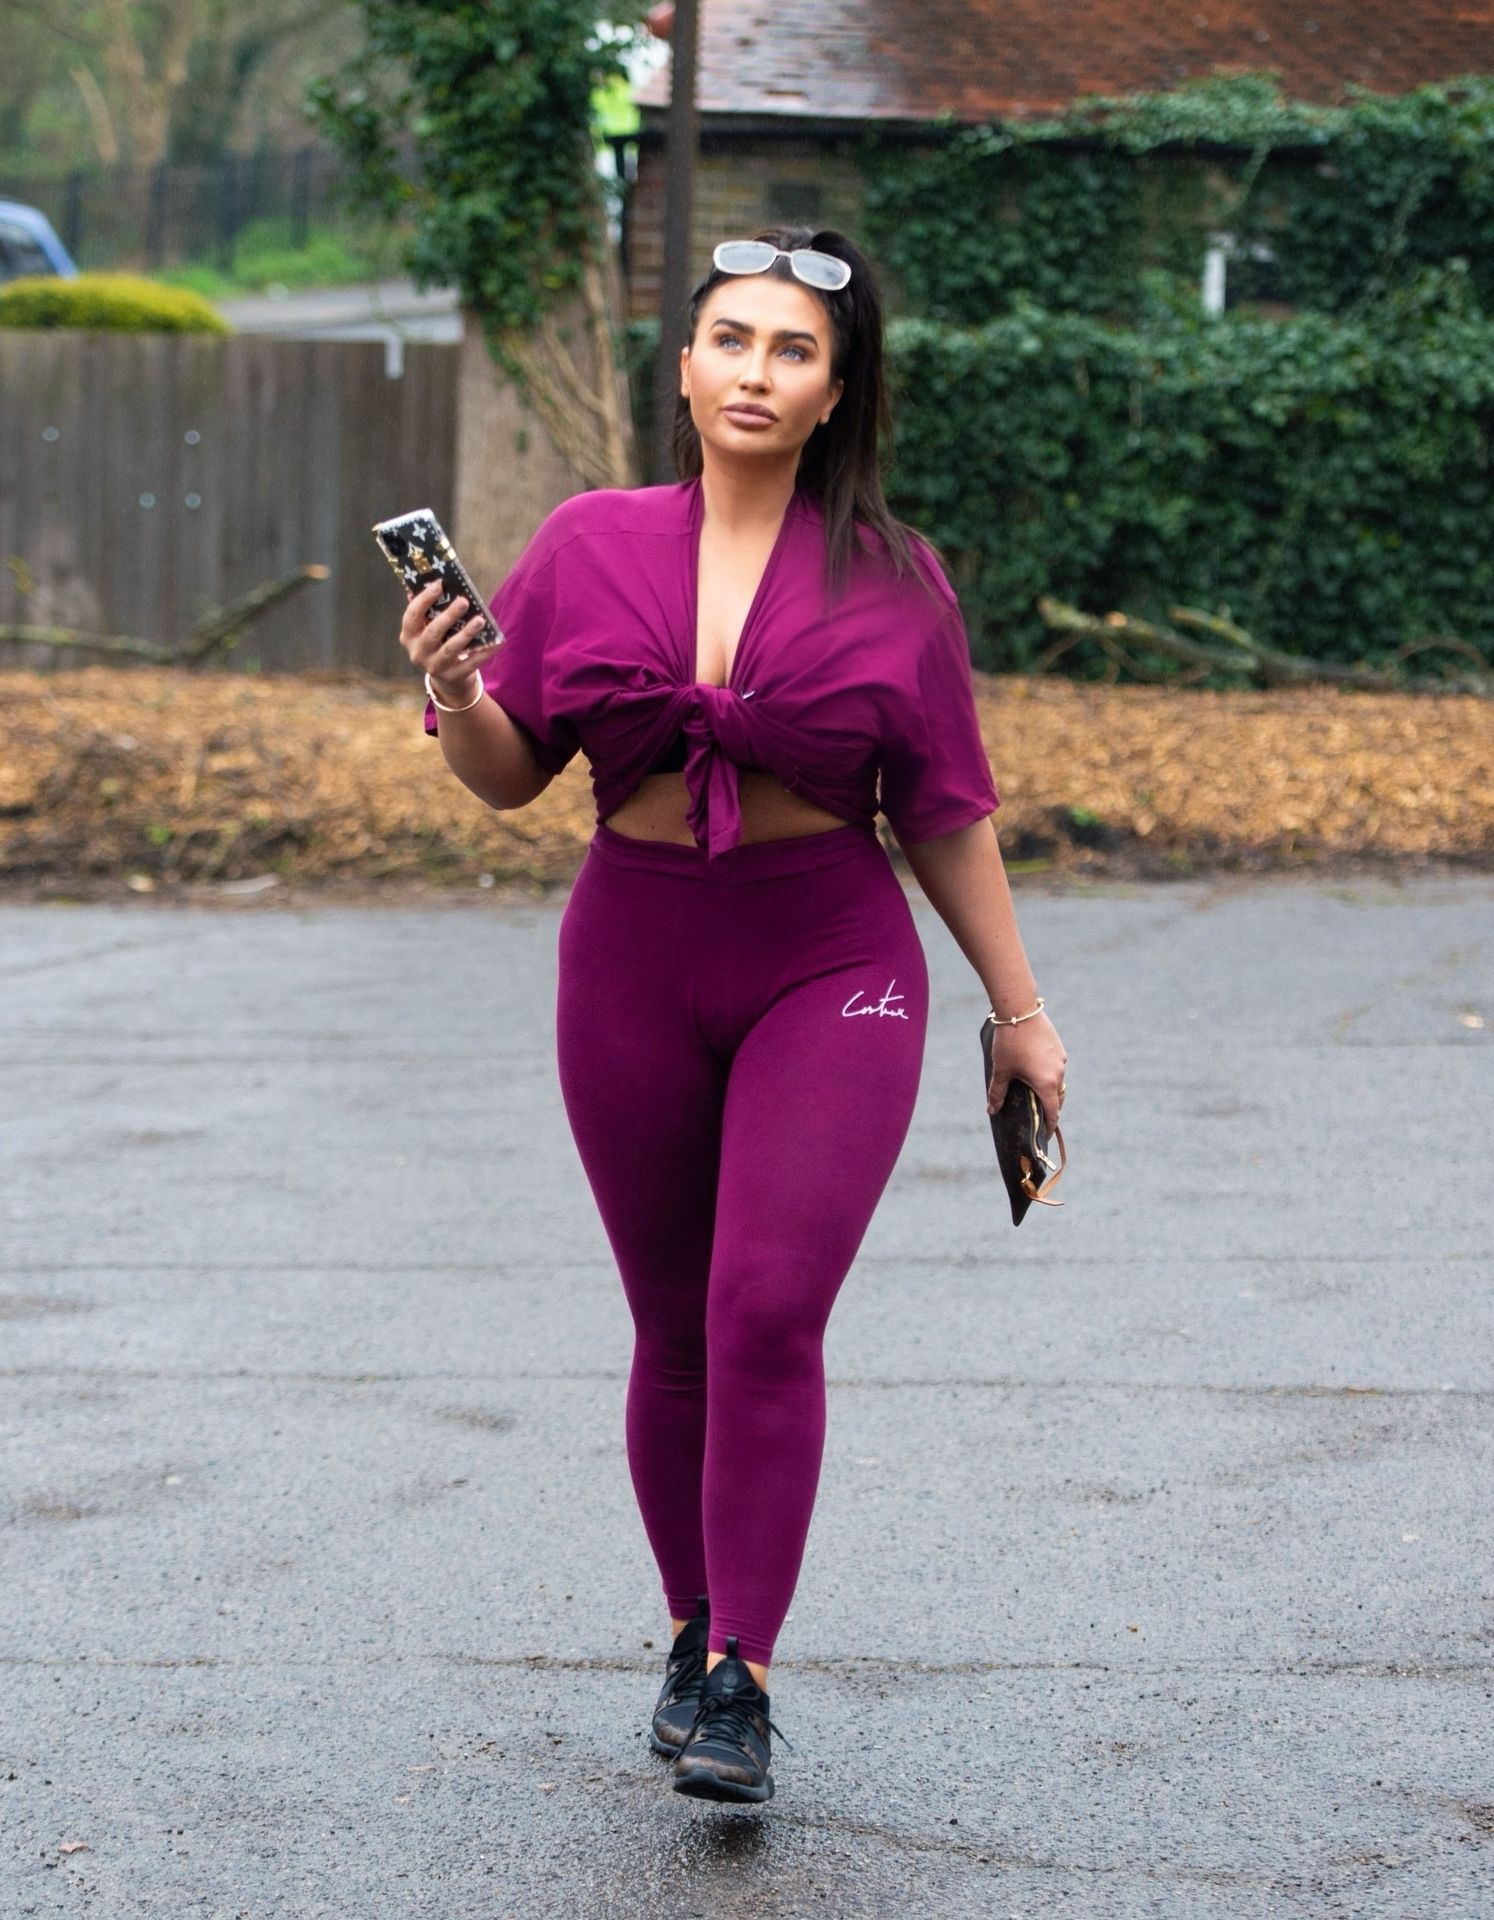 Lauren Goodger Is Seen Leaving Her Home Yesterday To Go For A Run In Essex 6 Photos Nude